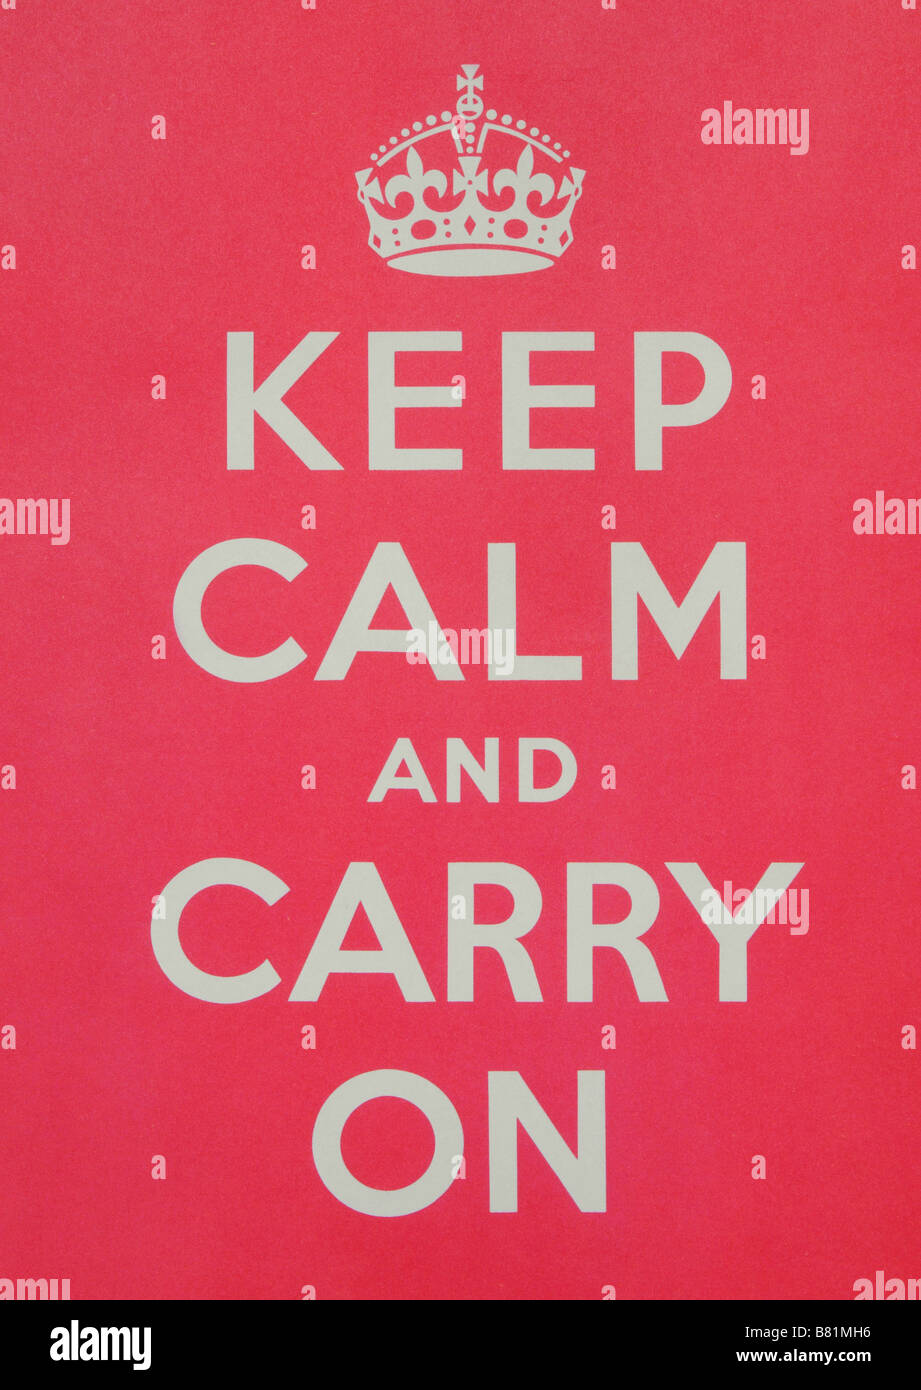 A British World War 2 propaganda poster urging people to Keep Calm and Carry On. As relevant today as when first issued in 1939. Stock Photo